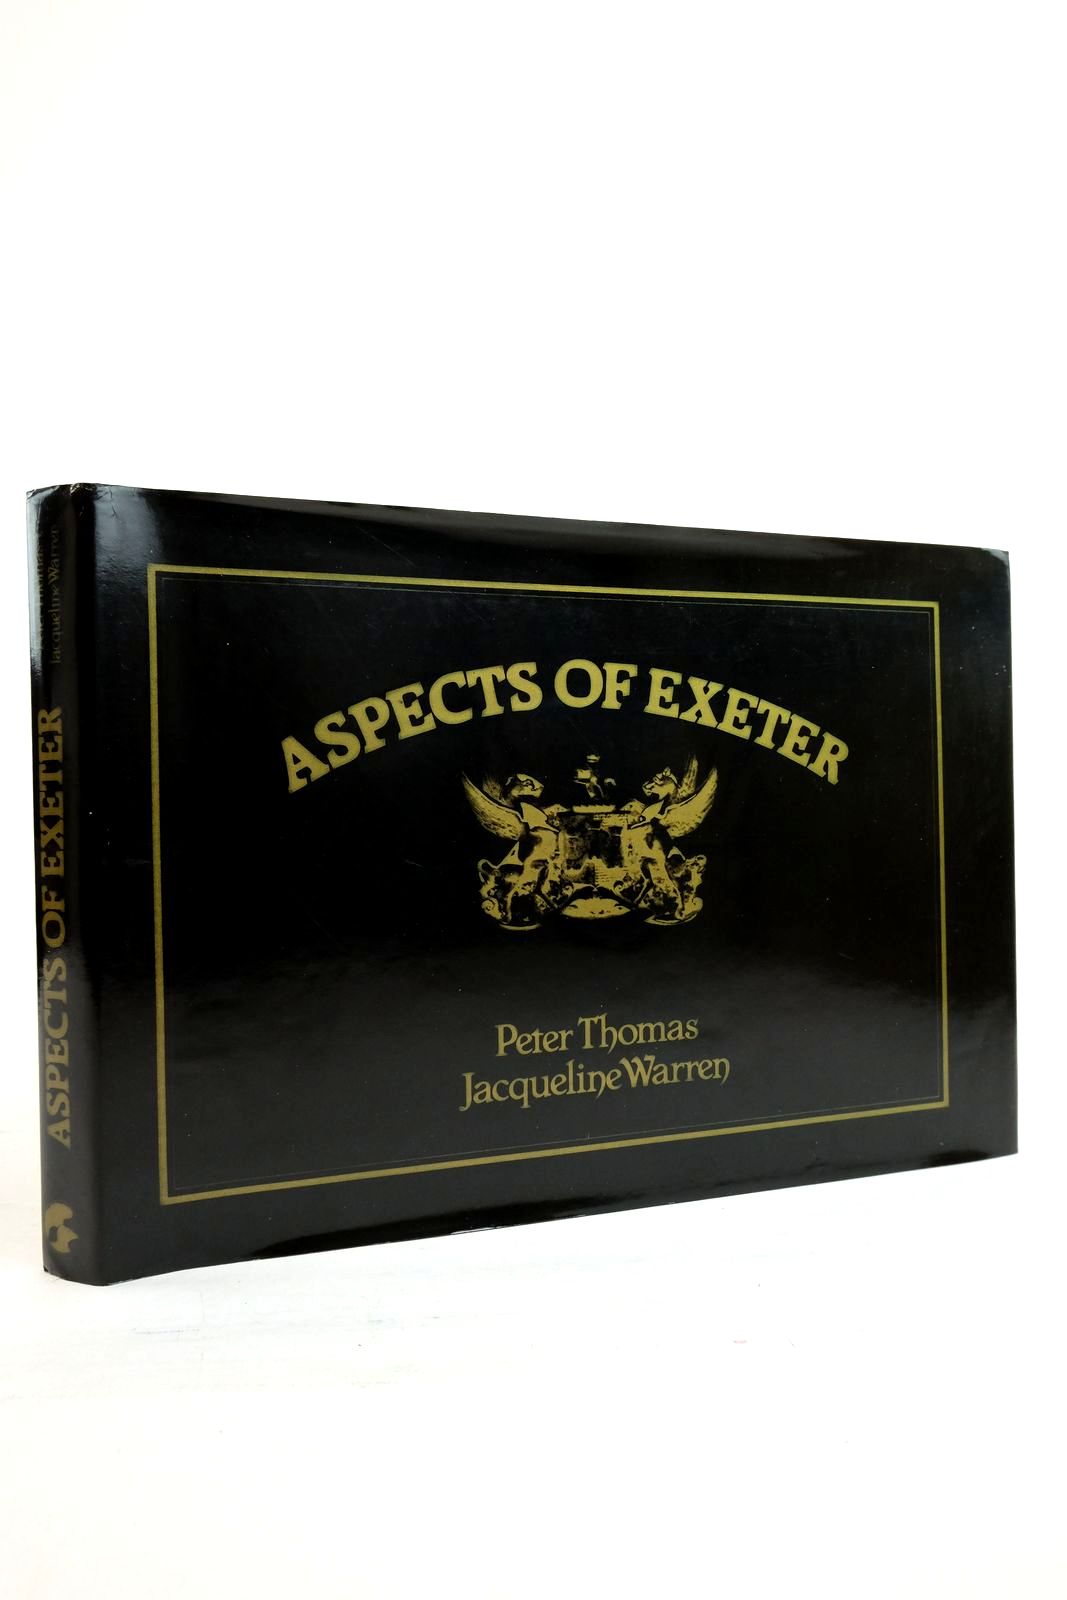 Photo of ASPECTS OF EXETER written by Thomas, Peter Warren, Jacqueline published by Baron Jay Ltd. (STOCK CODE: 2134883)  for sale by Stella & Rose's Books